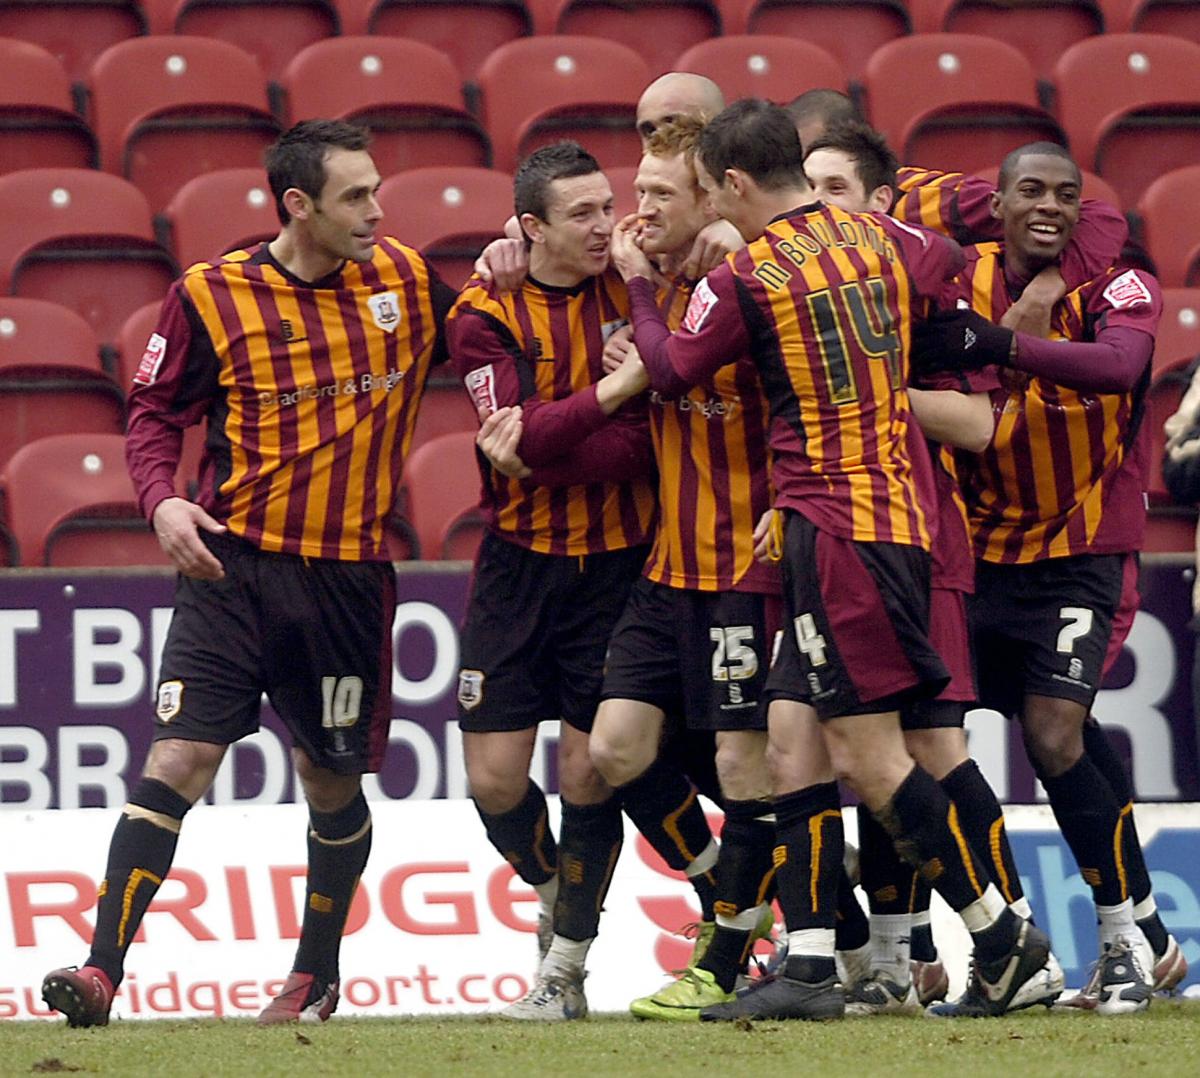 Steve Jones celebrates after scoring the match-winner – his second goal in consecutive home games